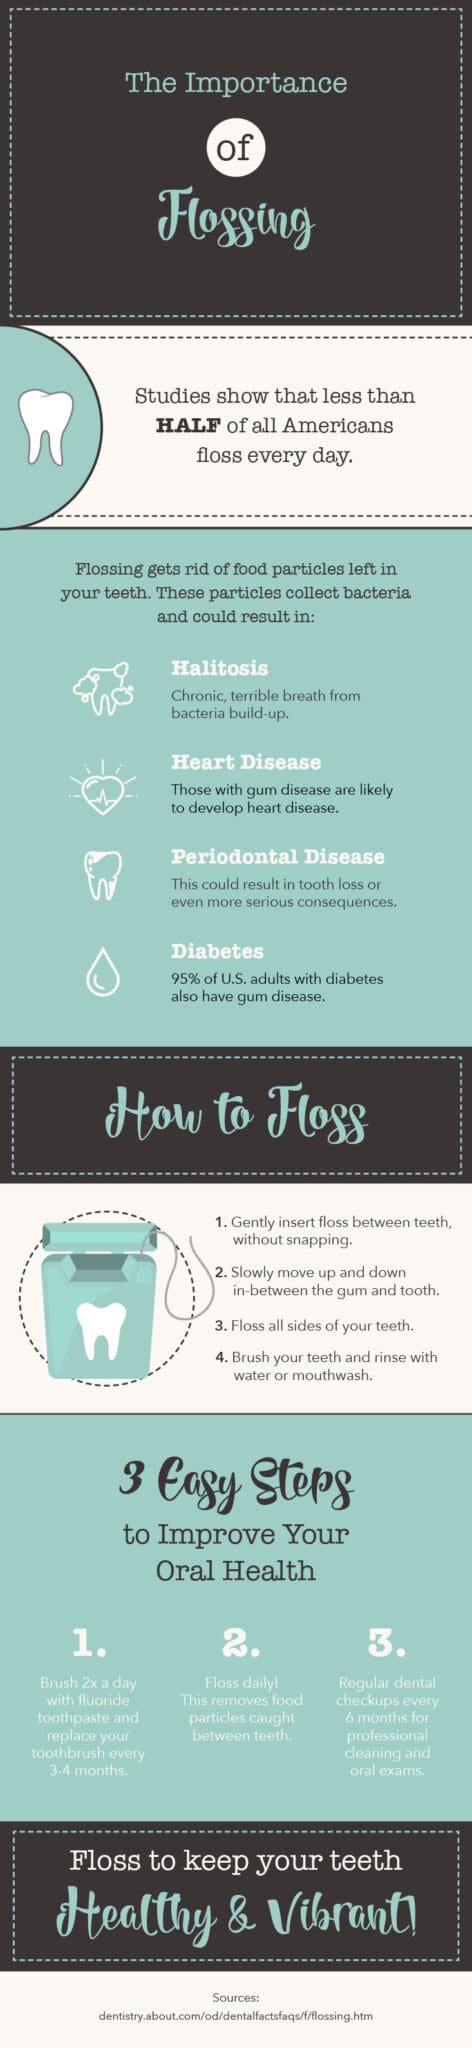 Flossing 101: the importance of flossing everyday.